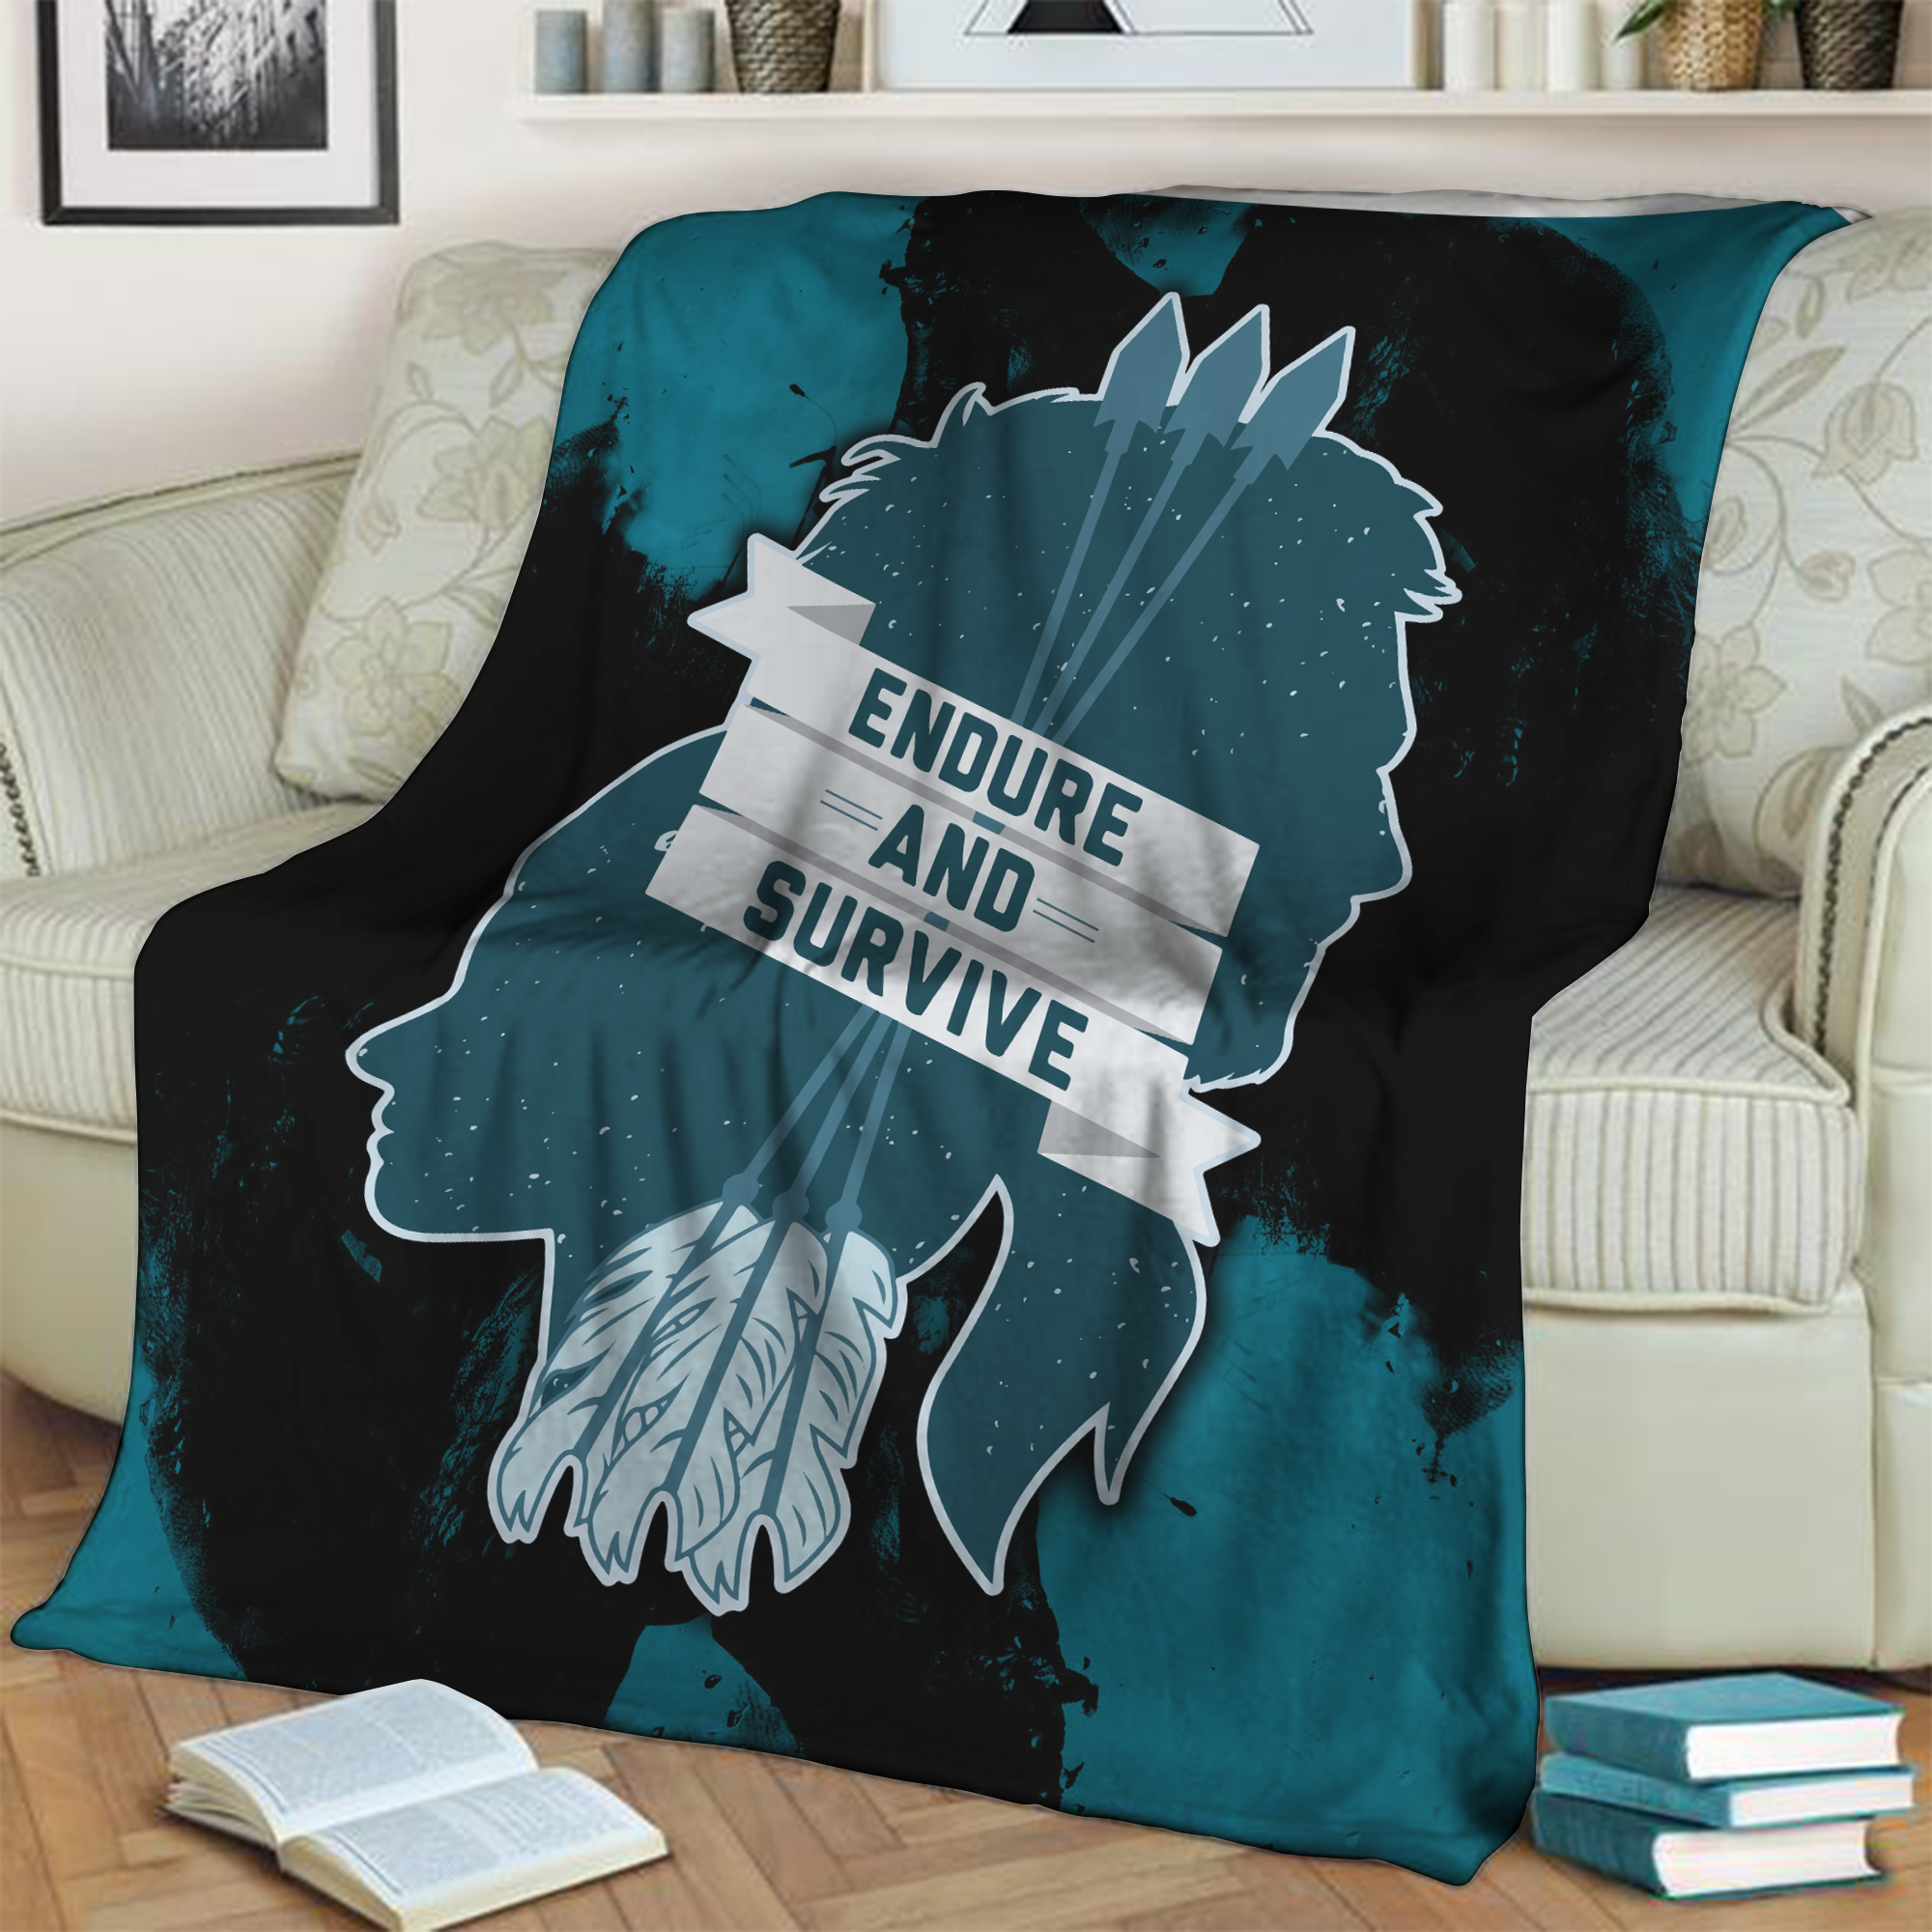 The Last Of Us-  Endure and Survive 3D Throw Blanket 150cm x 200cm  